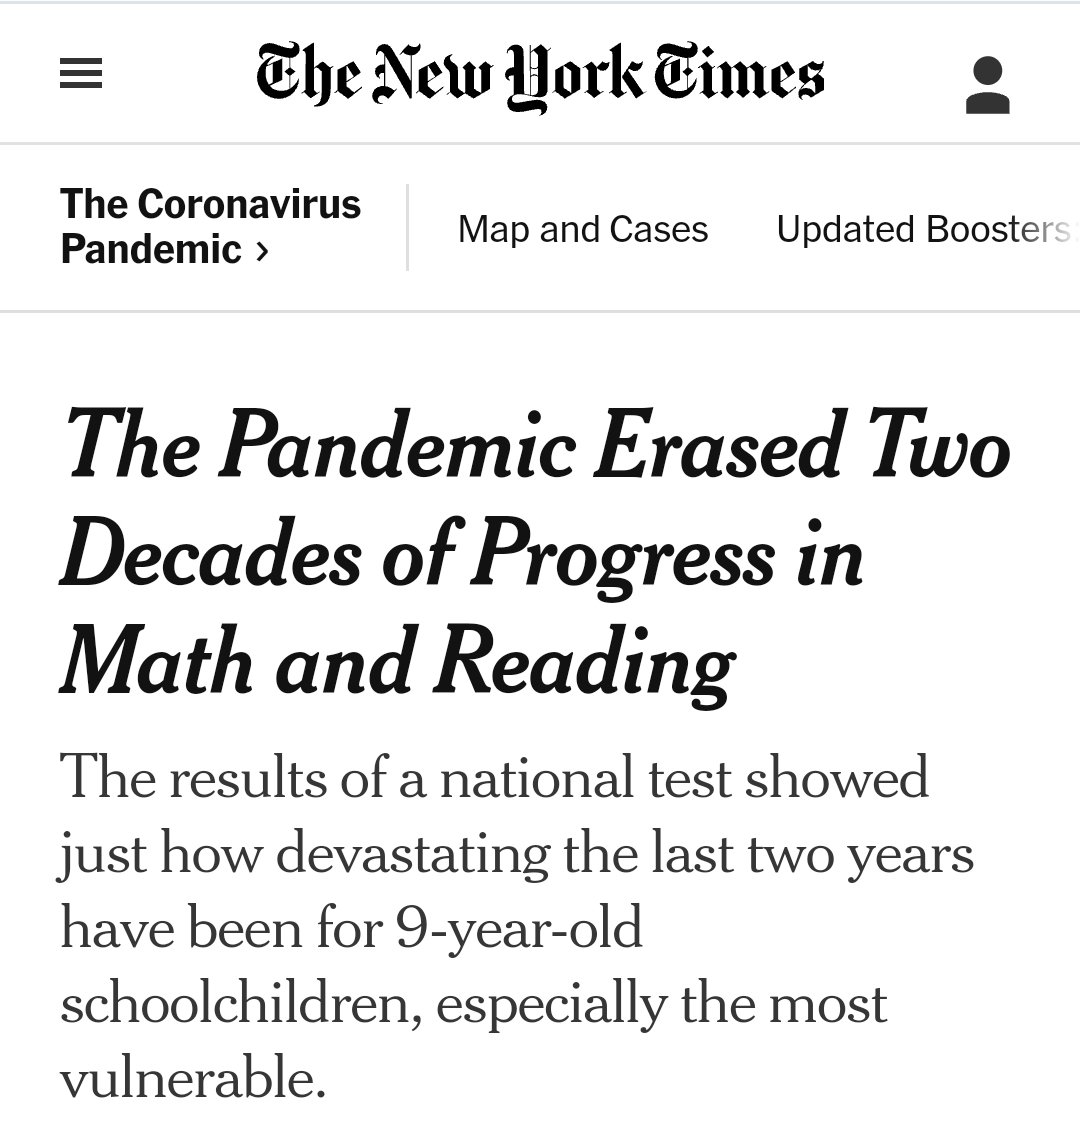 There will be no 'pandemic amnesty' for the school board members who did this to our children. They will be removed from office, one at a time.